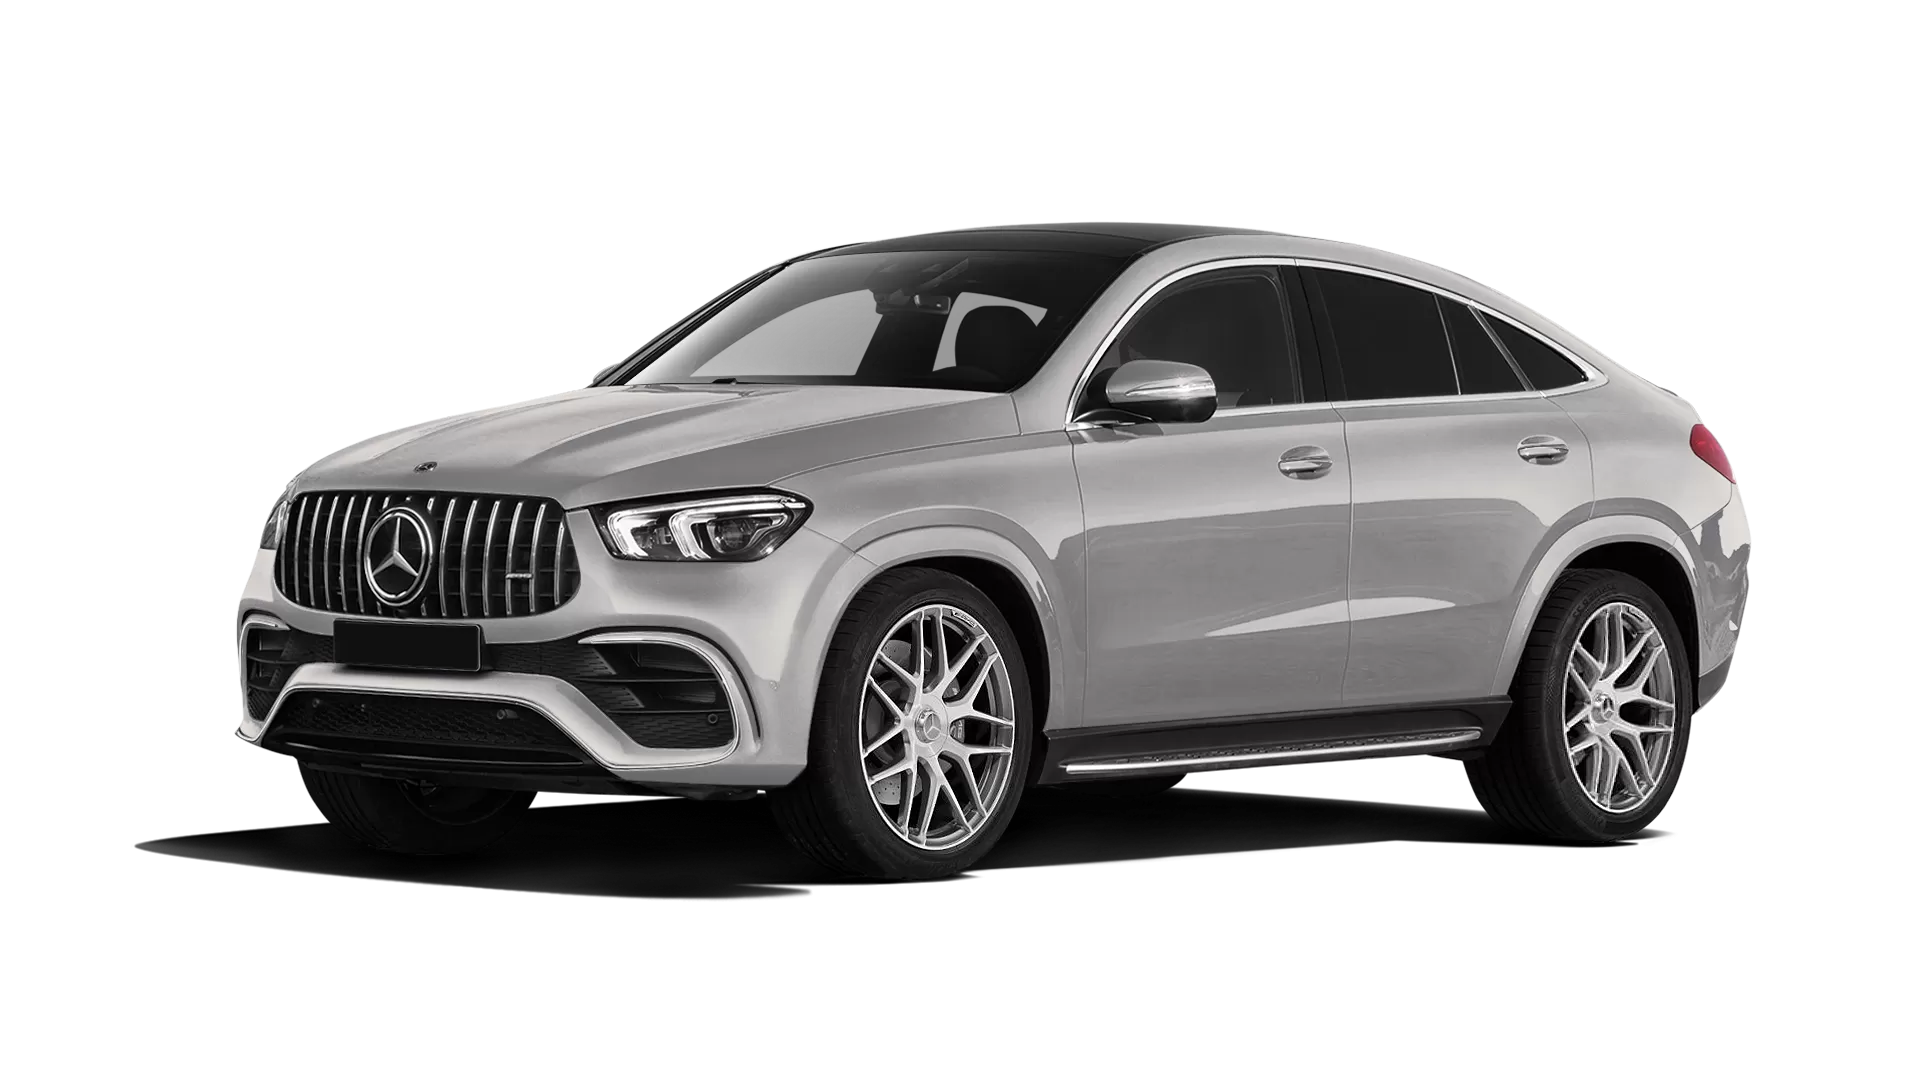 Mercedes GLE Coupe AMG 63 C167 stock front view in Mojave Silver color